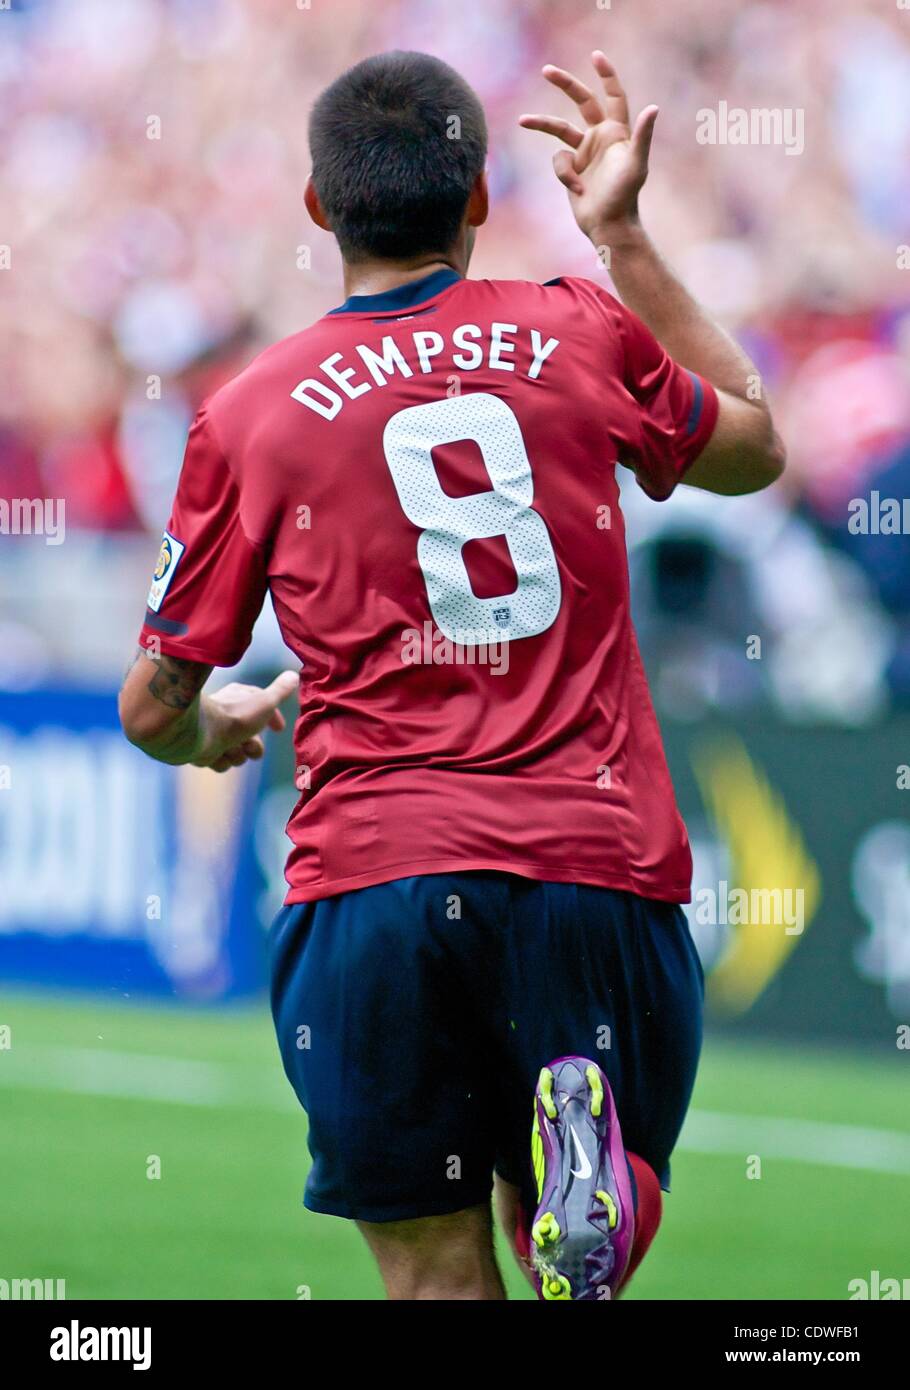 June 16, 2011 - Washington, District of Columbia, United States of America - United States Midfielder Clint Dempsey #8 scores late in the second half. The United State would go on to to defeat Jamaica 2-0 in the concacaf gold cup quarterfinals Sunday, June 19, 2011 at RFK Stadium in Washington DC. ( Stock Photo